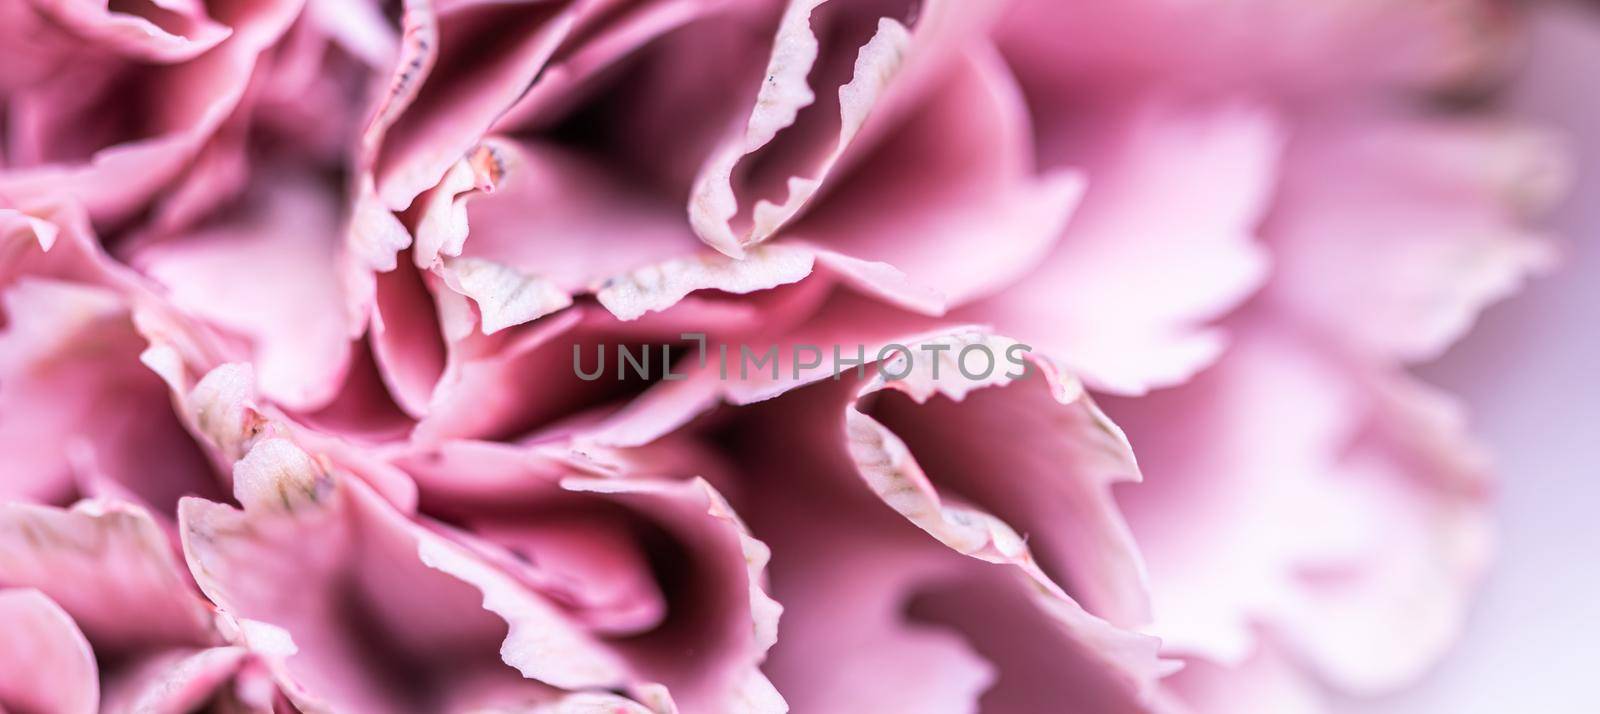 Retro art, vintage card and botanical concept - Abstract floral background, pink carnation flower petals. Macro flowers backdrop for holiday brand design